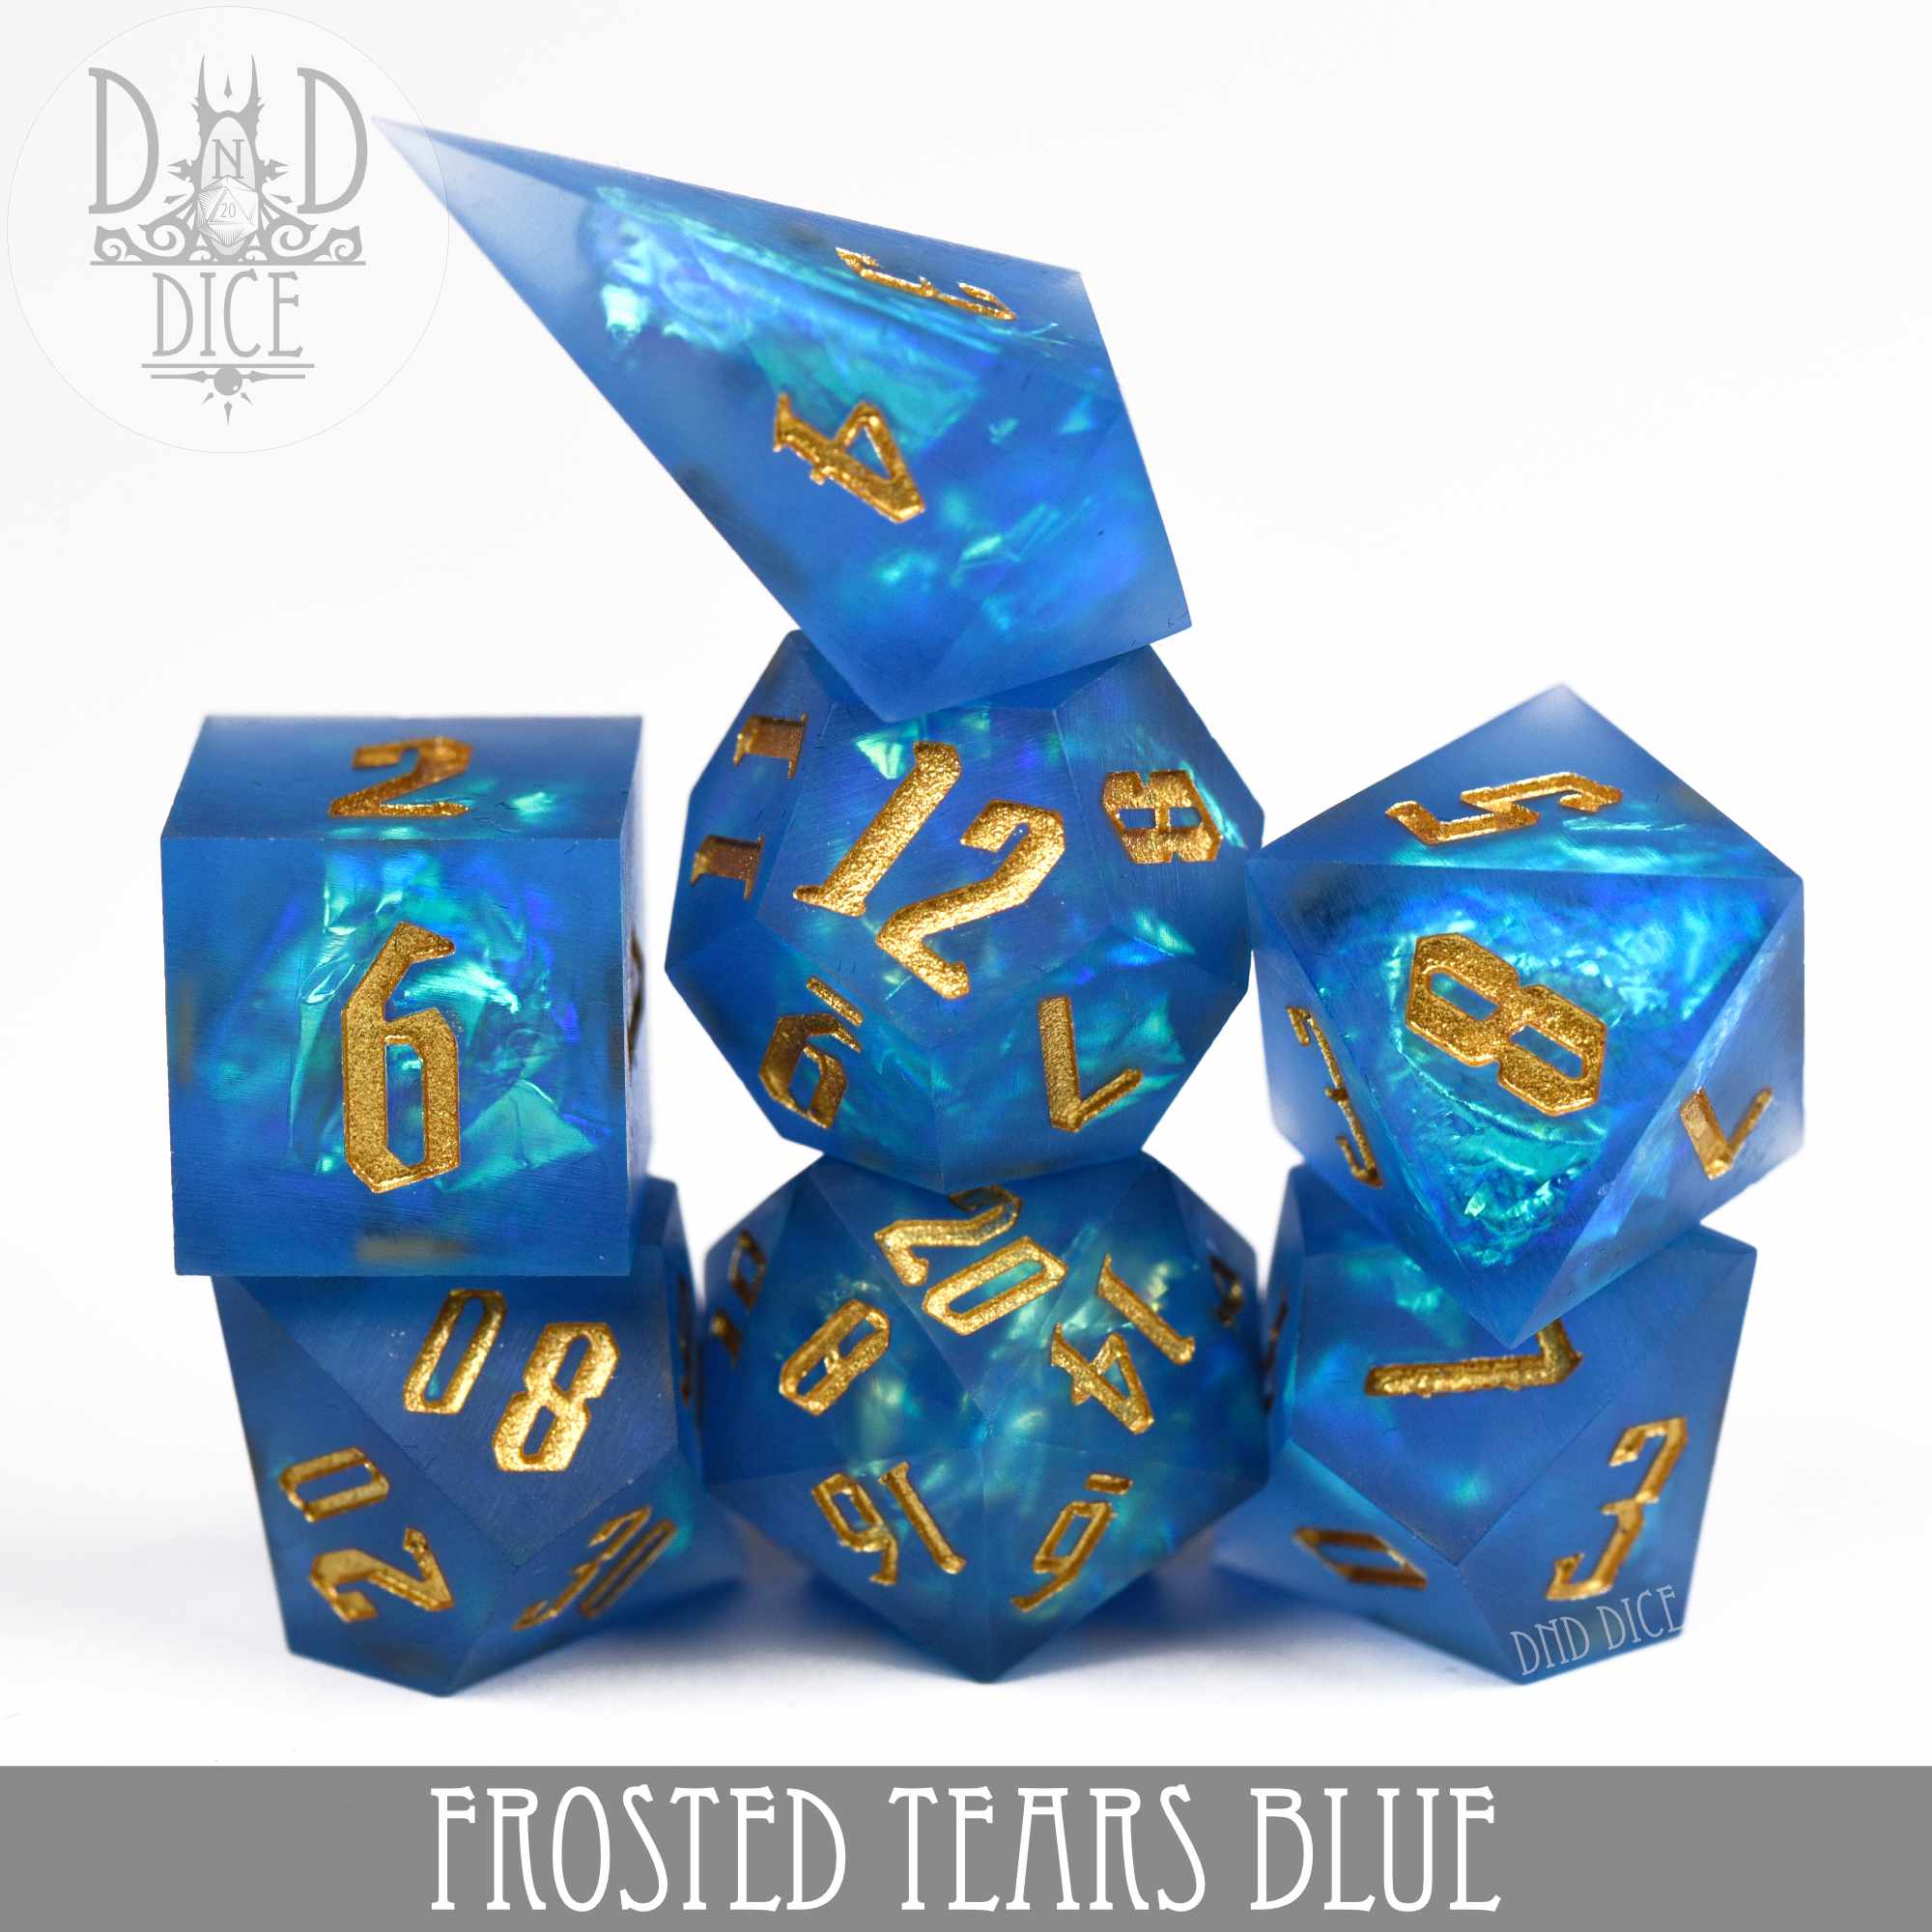 Frosted Tears Blue Handmade Dice Set